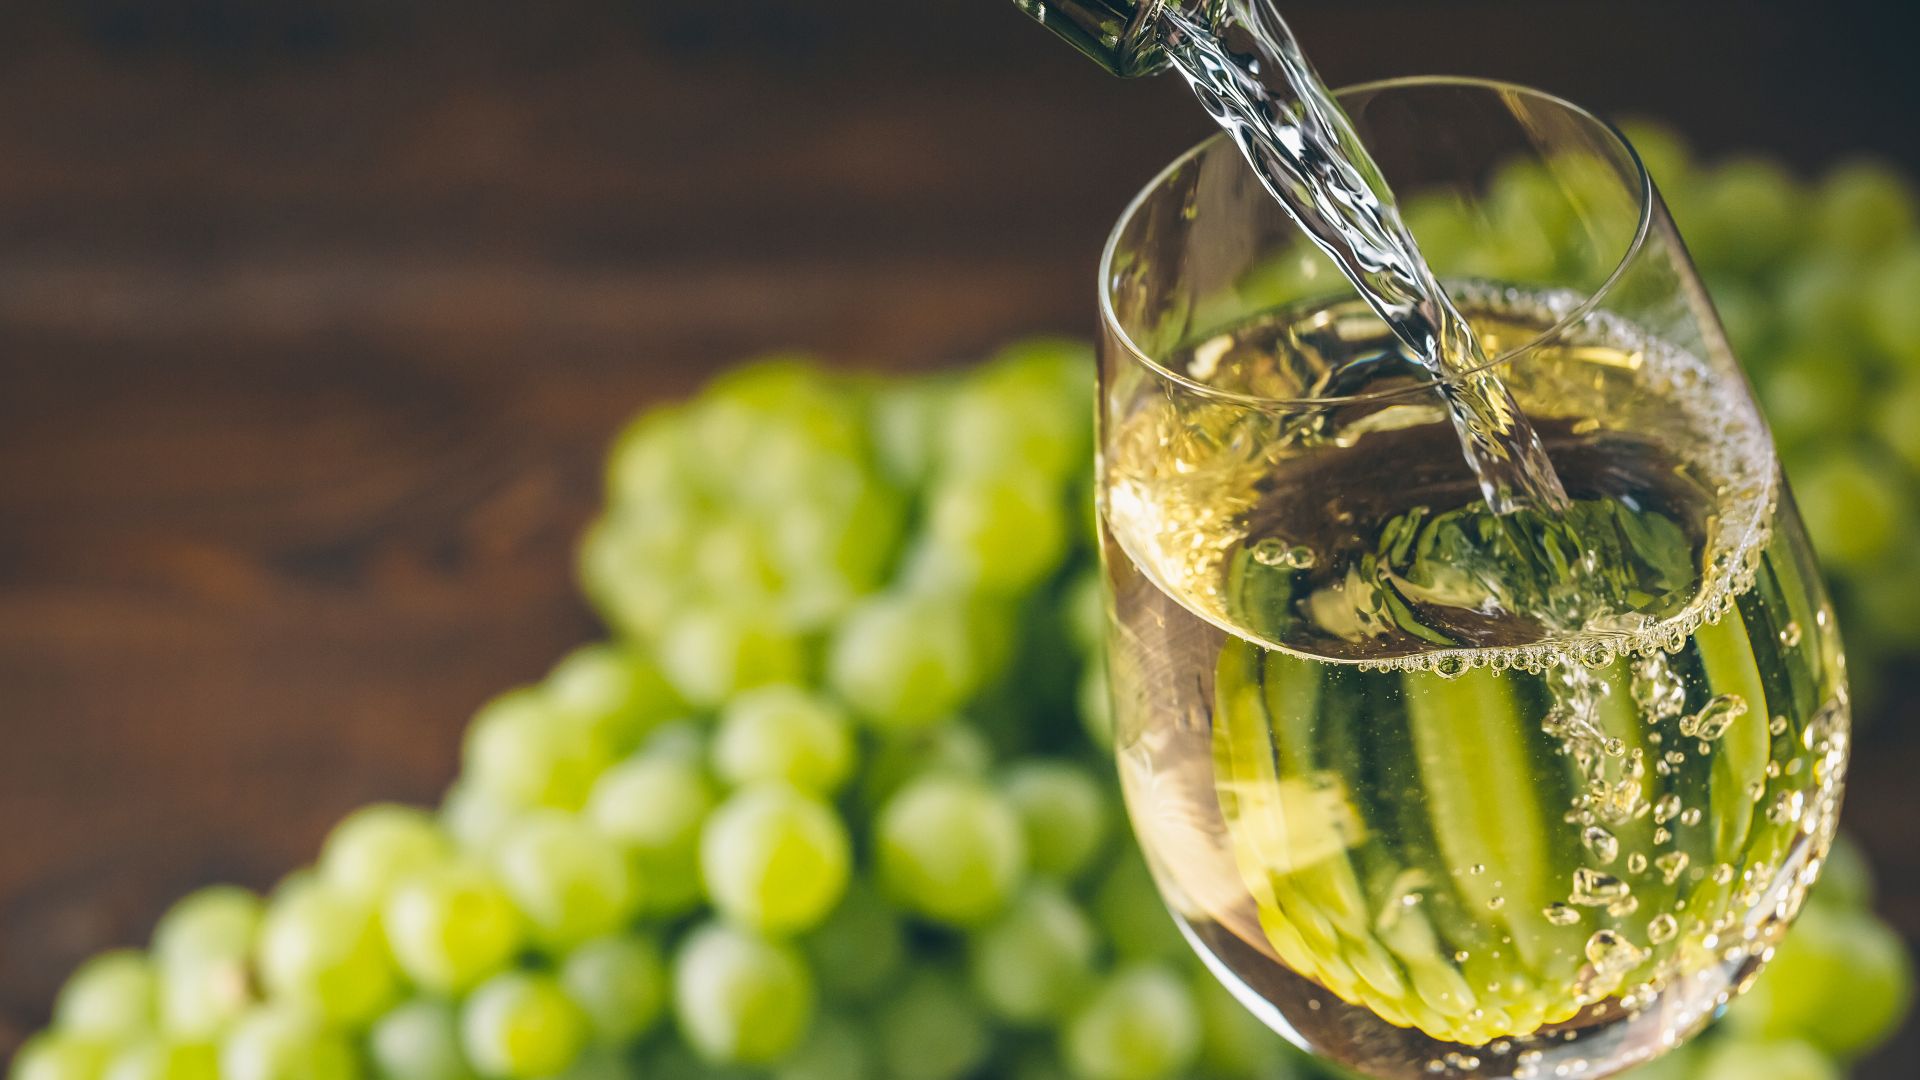 White wine is poured with green grapes in the background